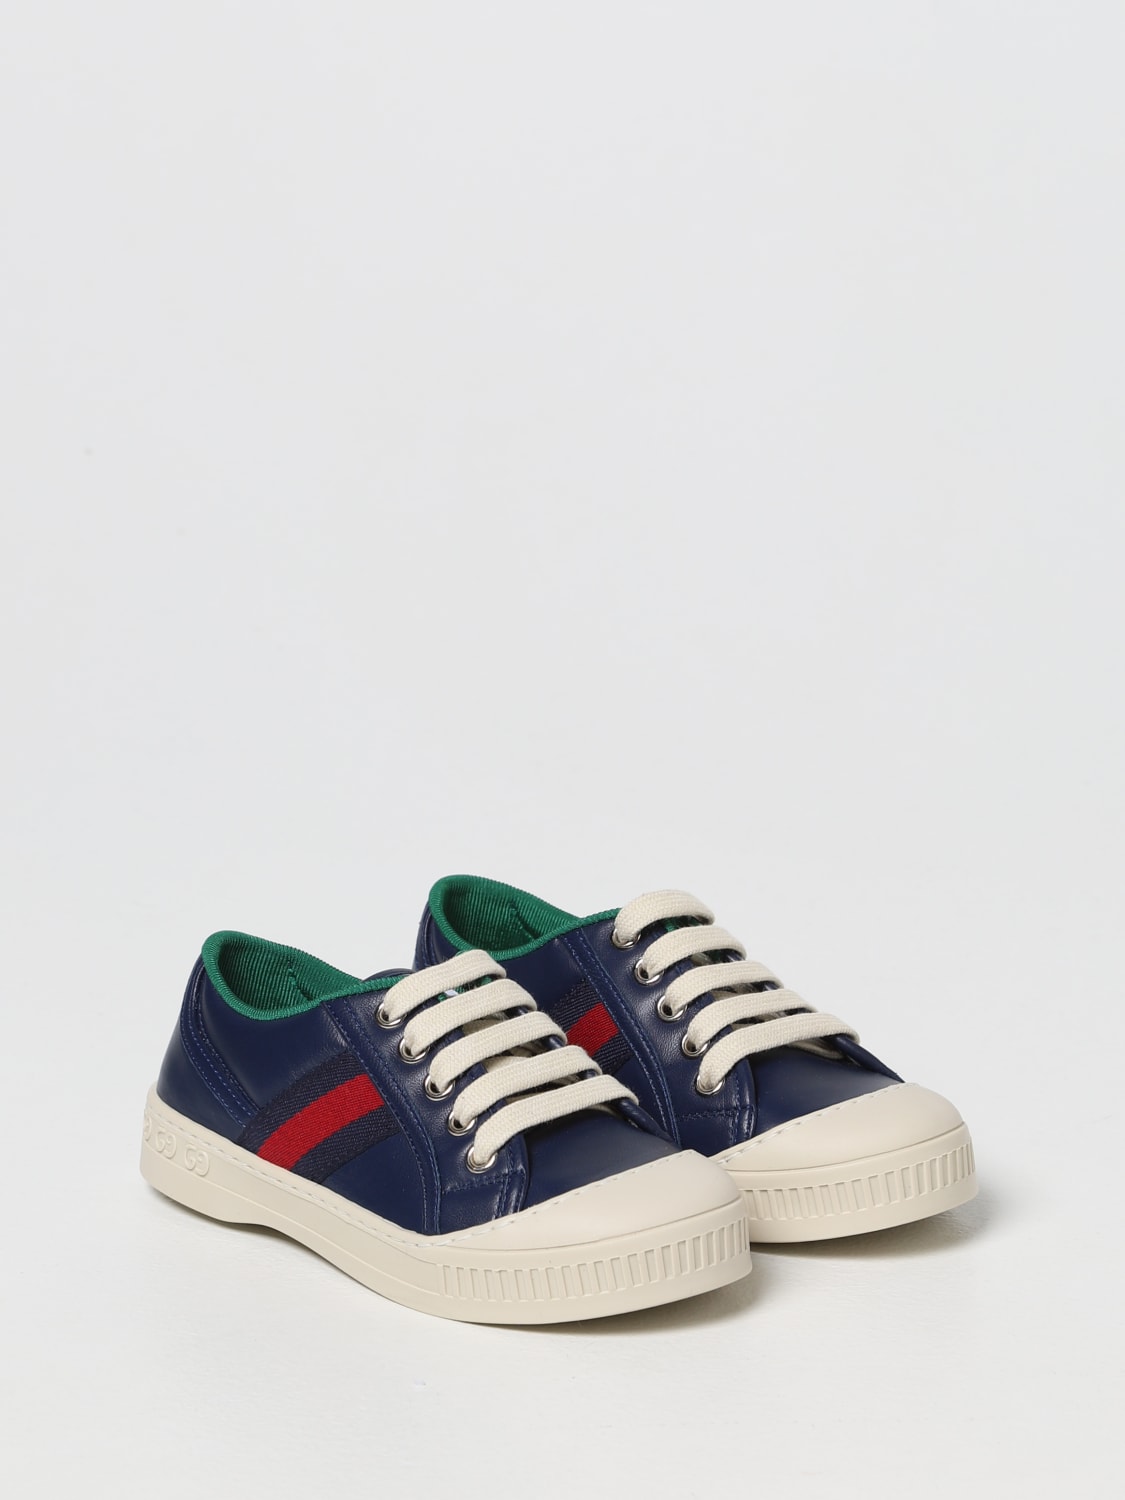 udrydde Litteratur lomme GUCCI: smooth leather sneakers - Blue | Gucci shoes 68224917L10 online on  GIGLIO.COM